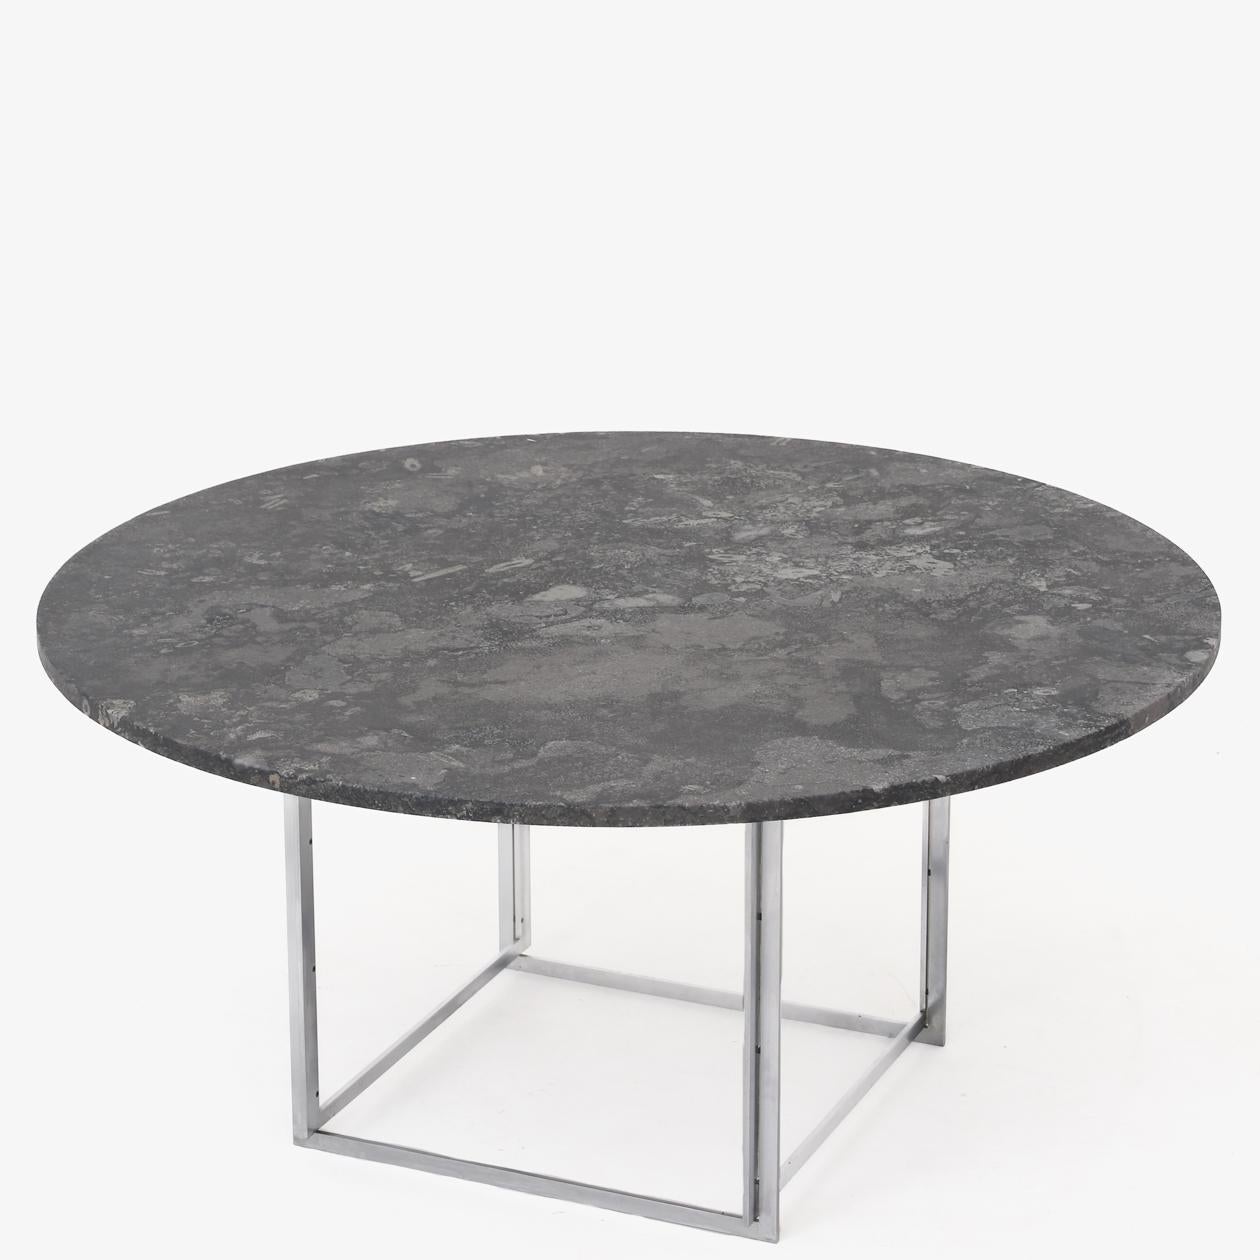 Patinated PK 54 Table with Porsgrunn Marble by Poul Kjærholm